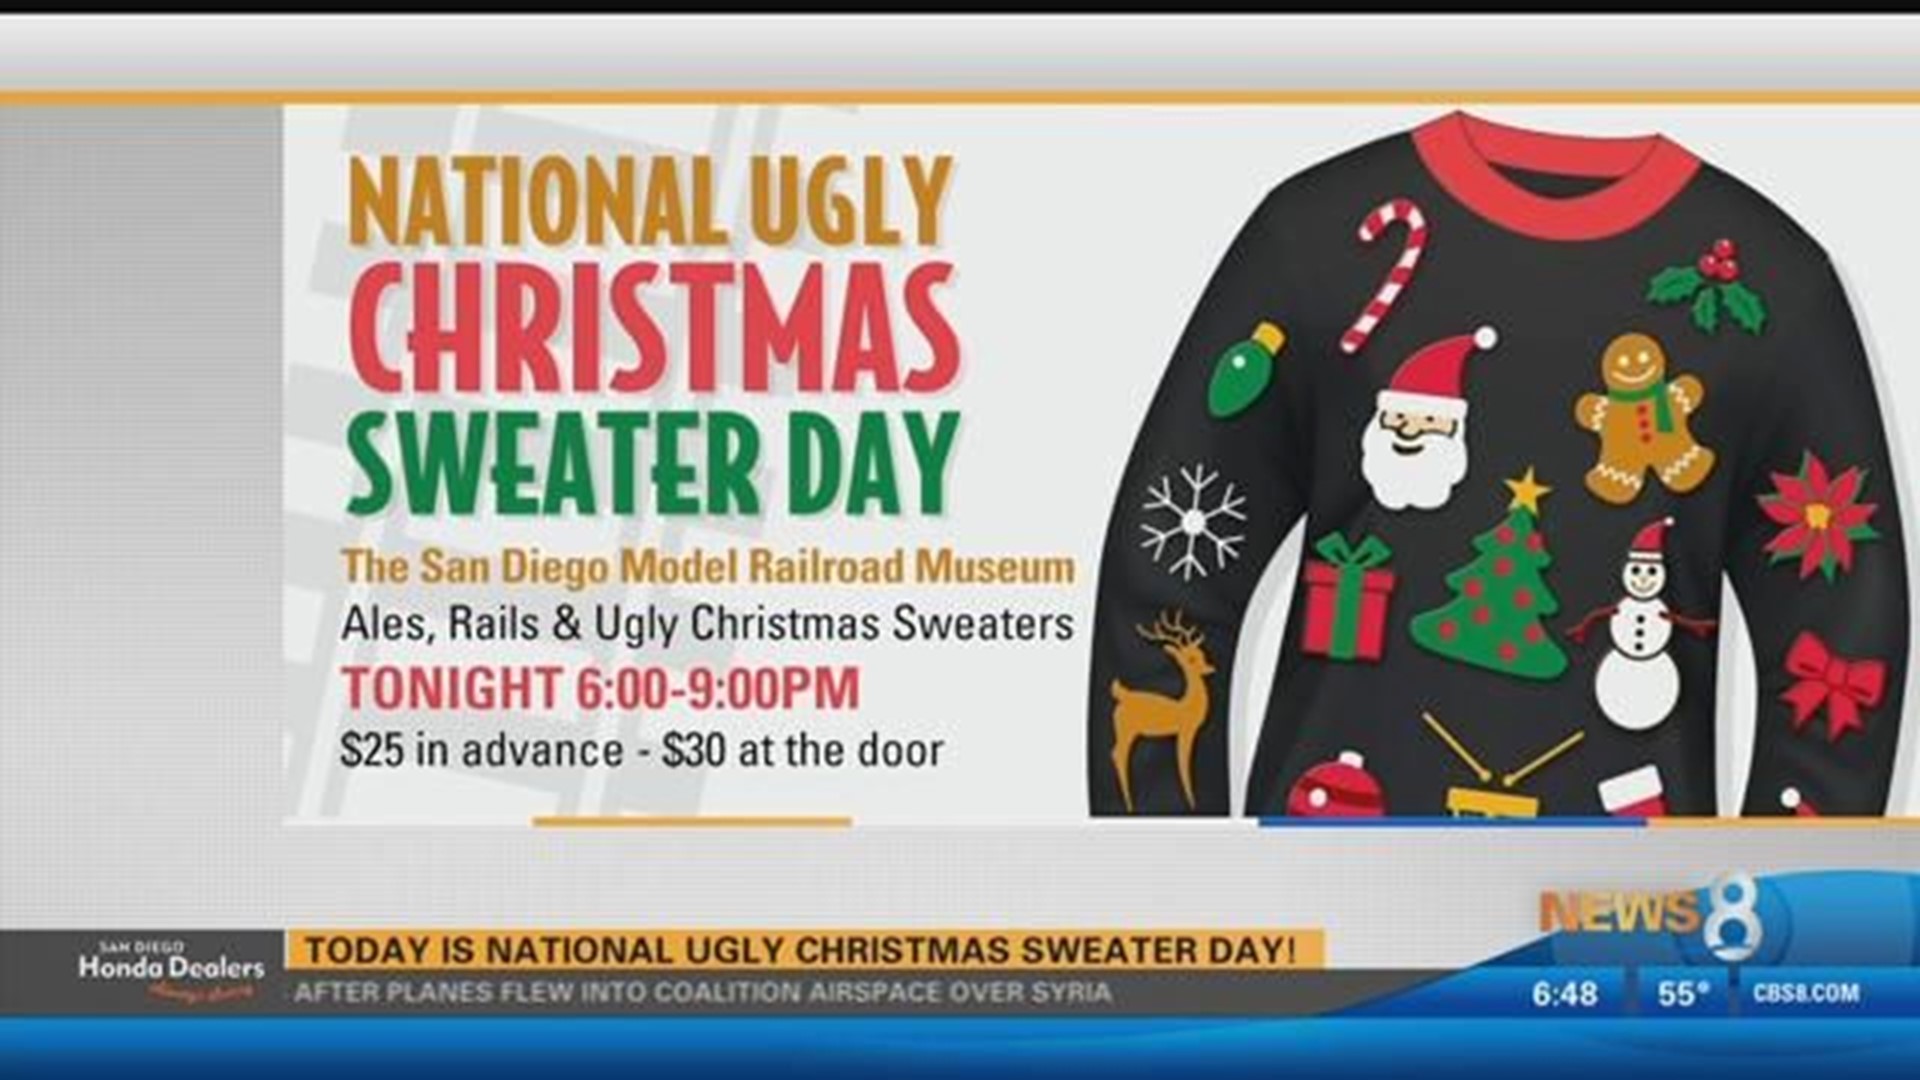 It's National Ugly Christmas Sweater Day